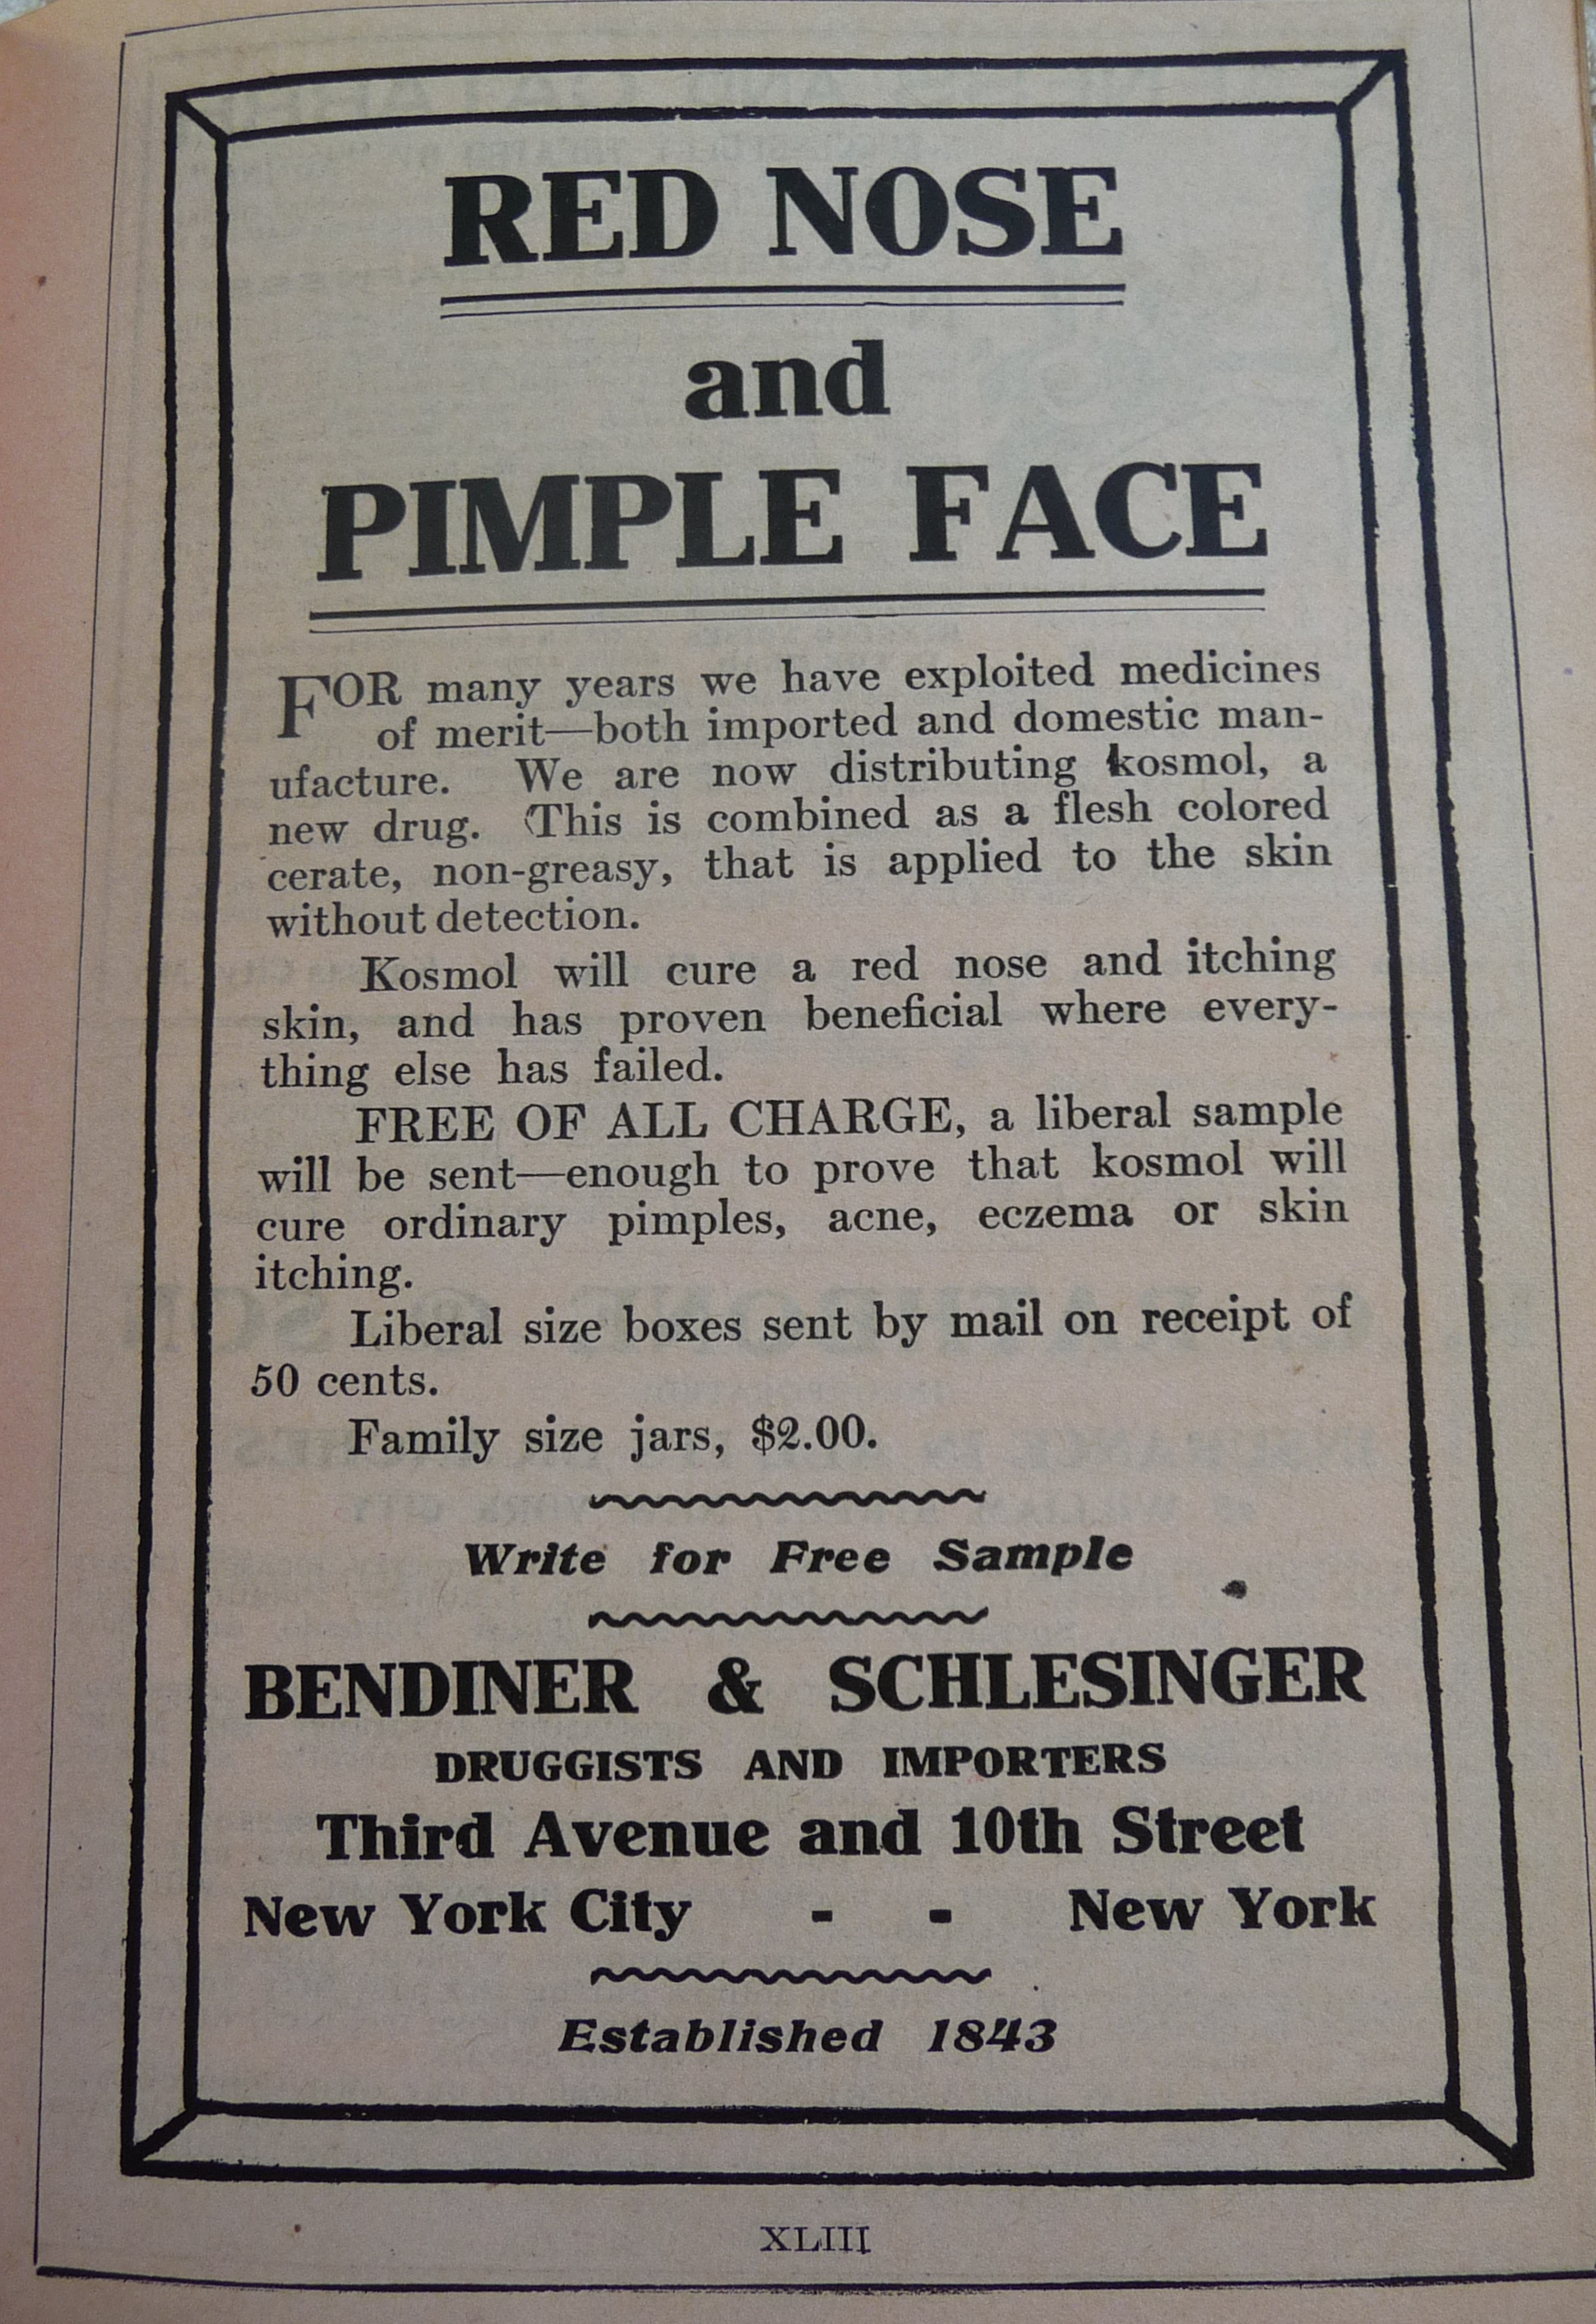 Old Time Ads From The 1910 World Almanac - Part 1